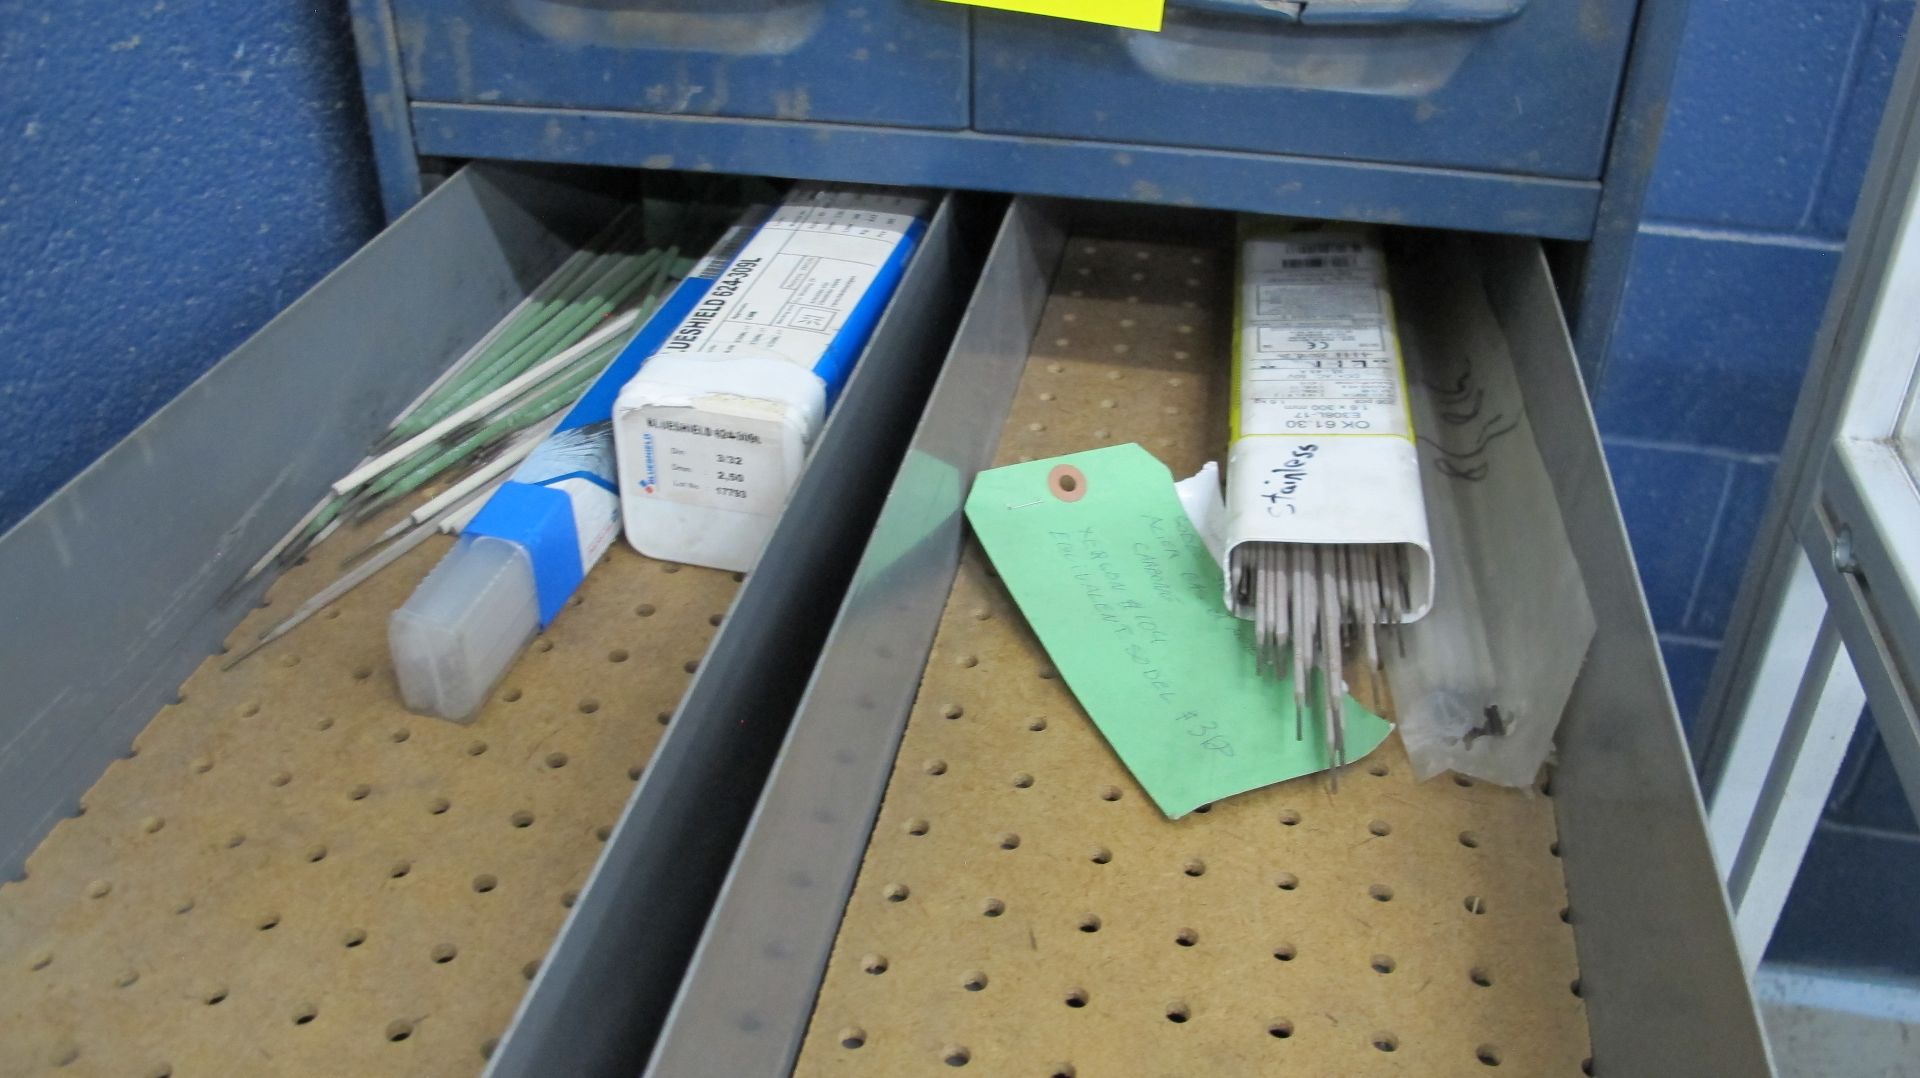 LOT OF WELDING ELECTRODES IN 10-LEVEL STORAGE CABINET AND WELDING SUPPLIES IN 2ND 10-LEVEL STORAGE - Image 4 of 14